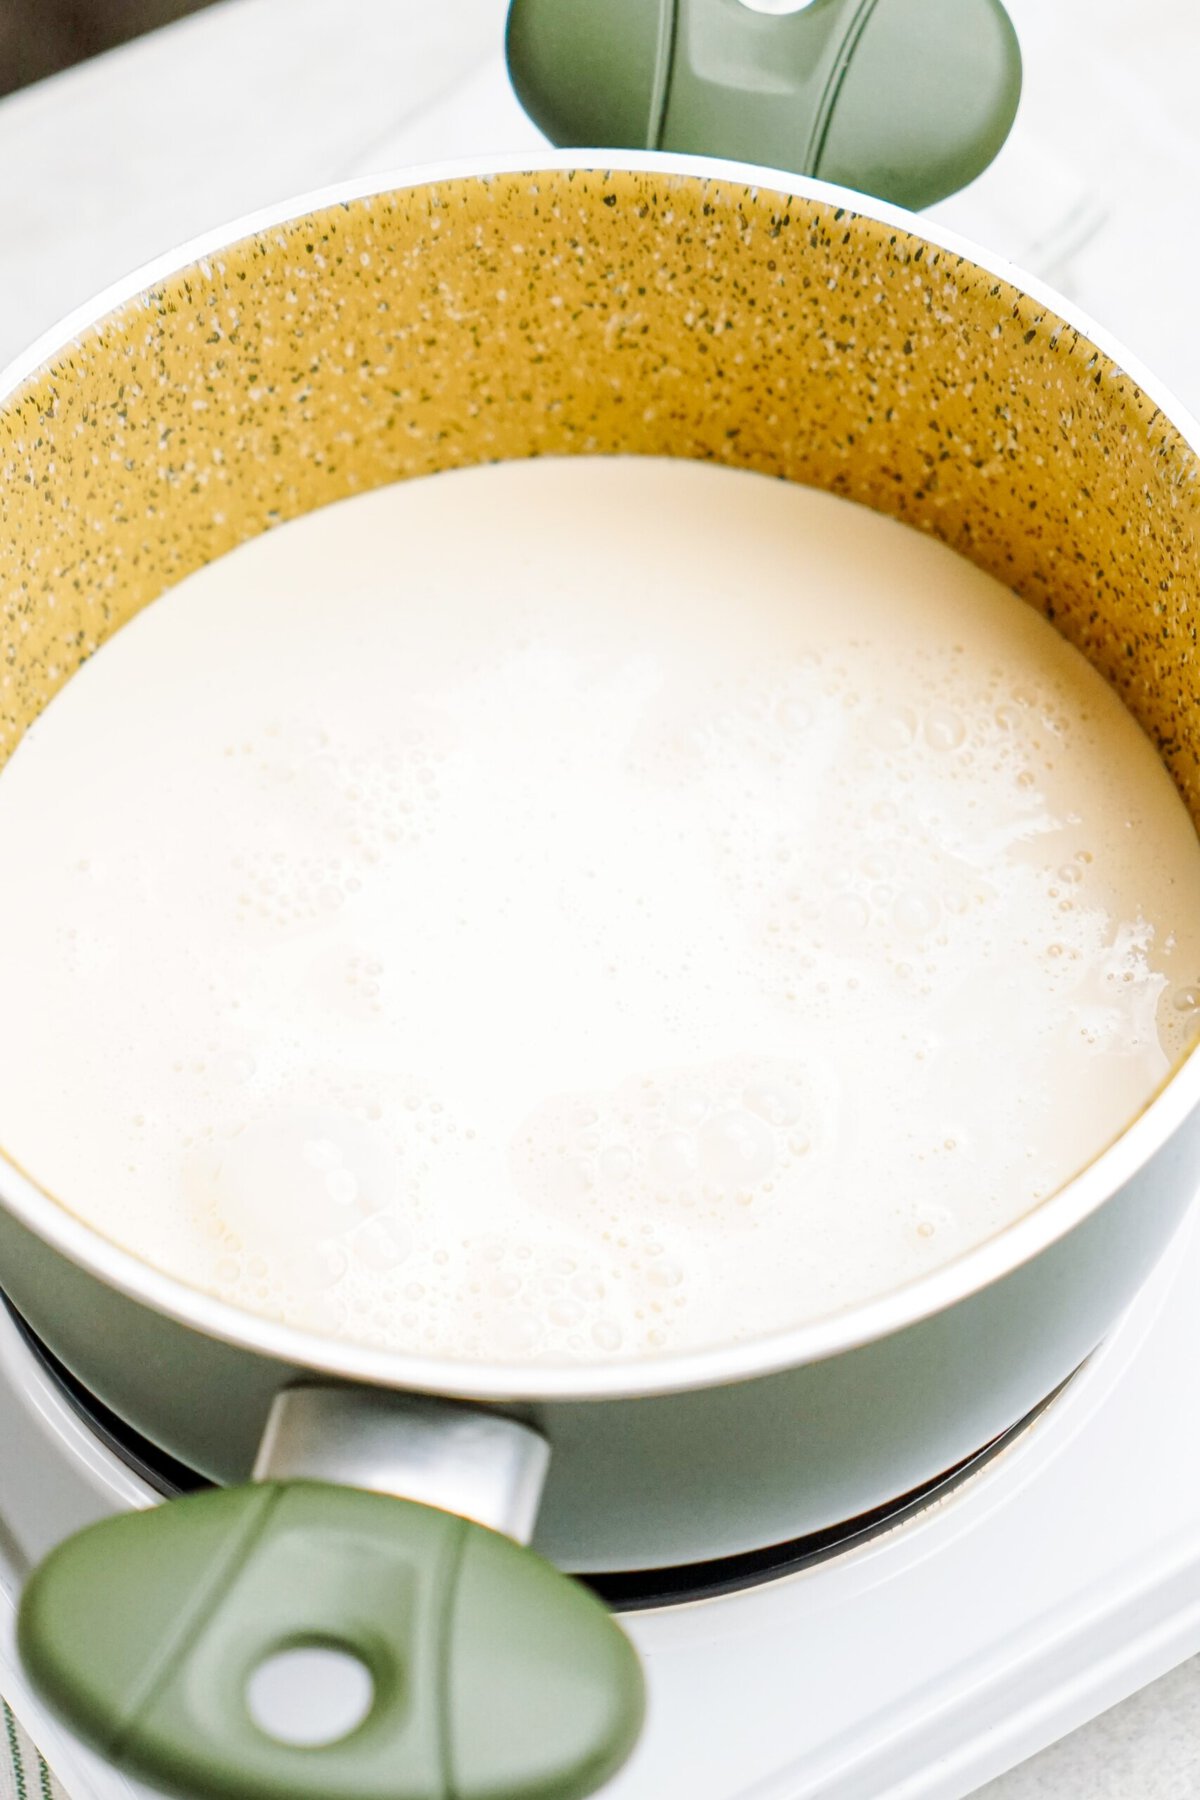 A green cooking pot with a speckled yellow interior contains a bubbling white queso dip, placed on a white stovetop.